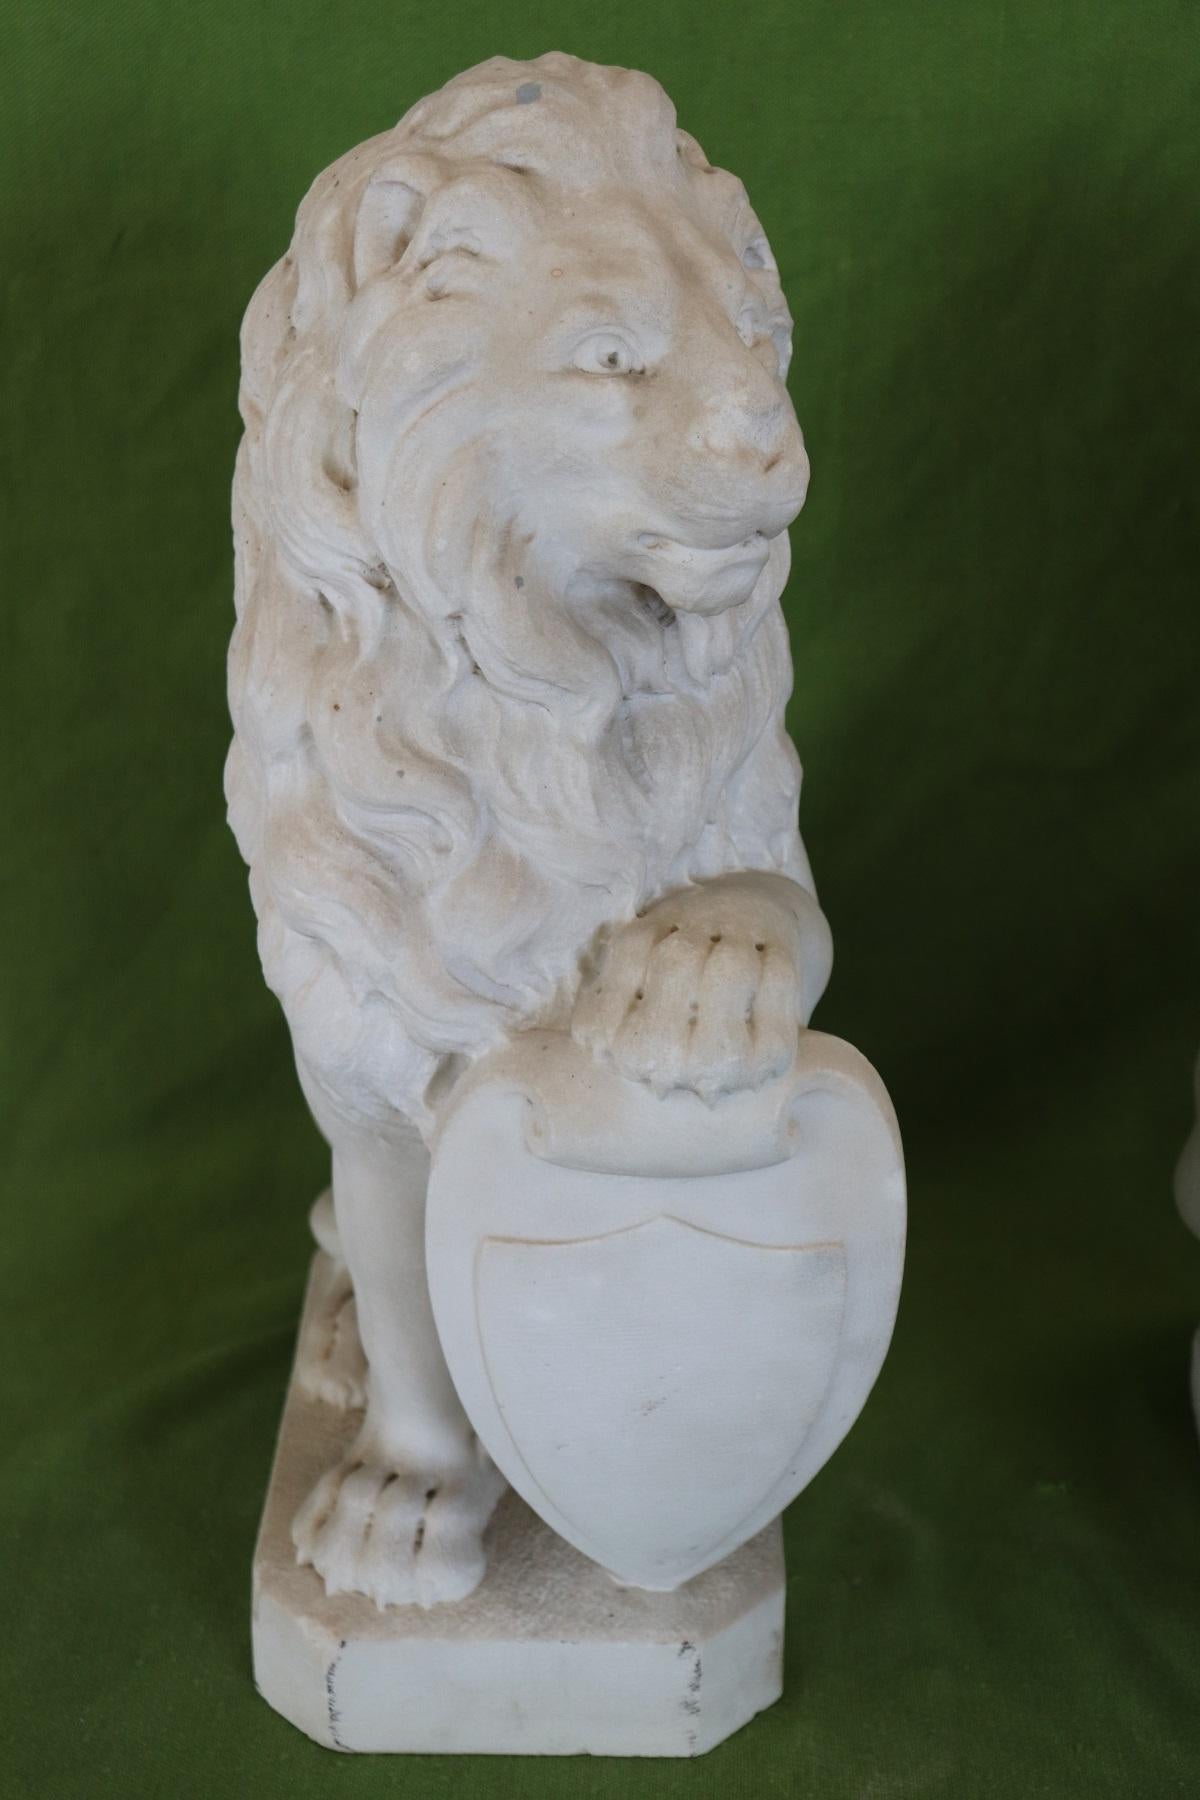 Refined sculpture in Italian white Carrara marble pair of lions dating back to the end of the 19th century. Performed with great artistic skill to note the details of the mane of lions and muscles. The lions are represented in their pride while